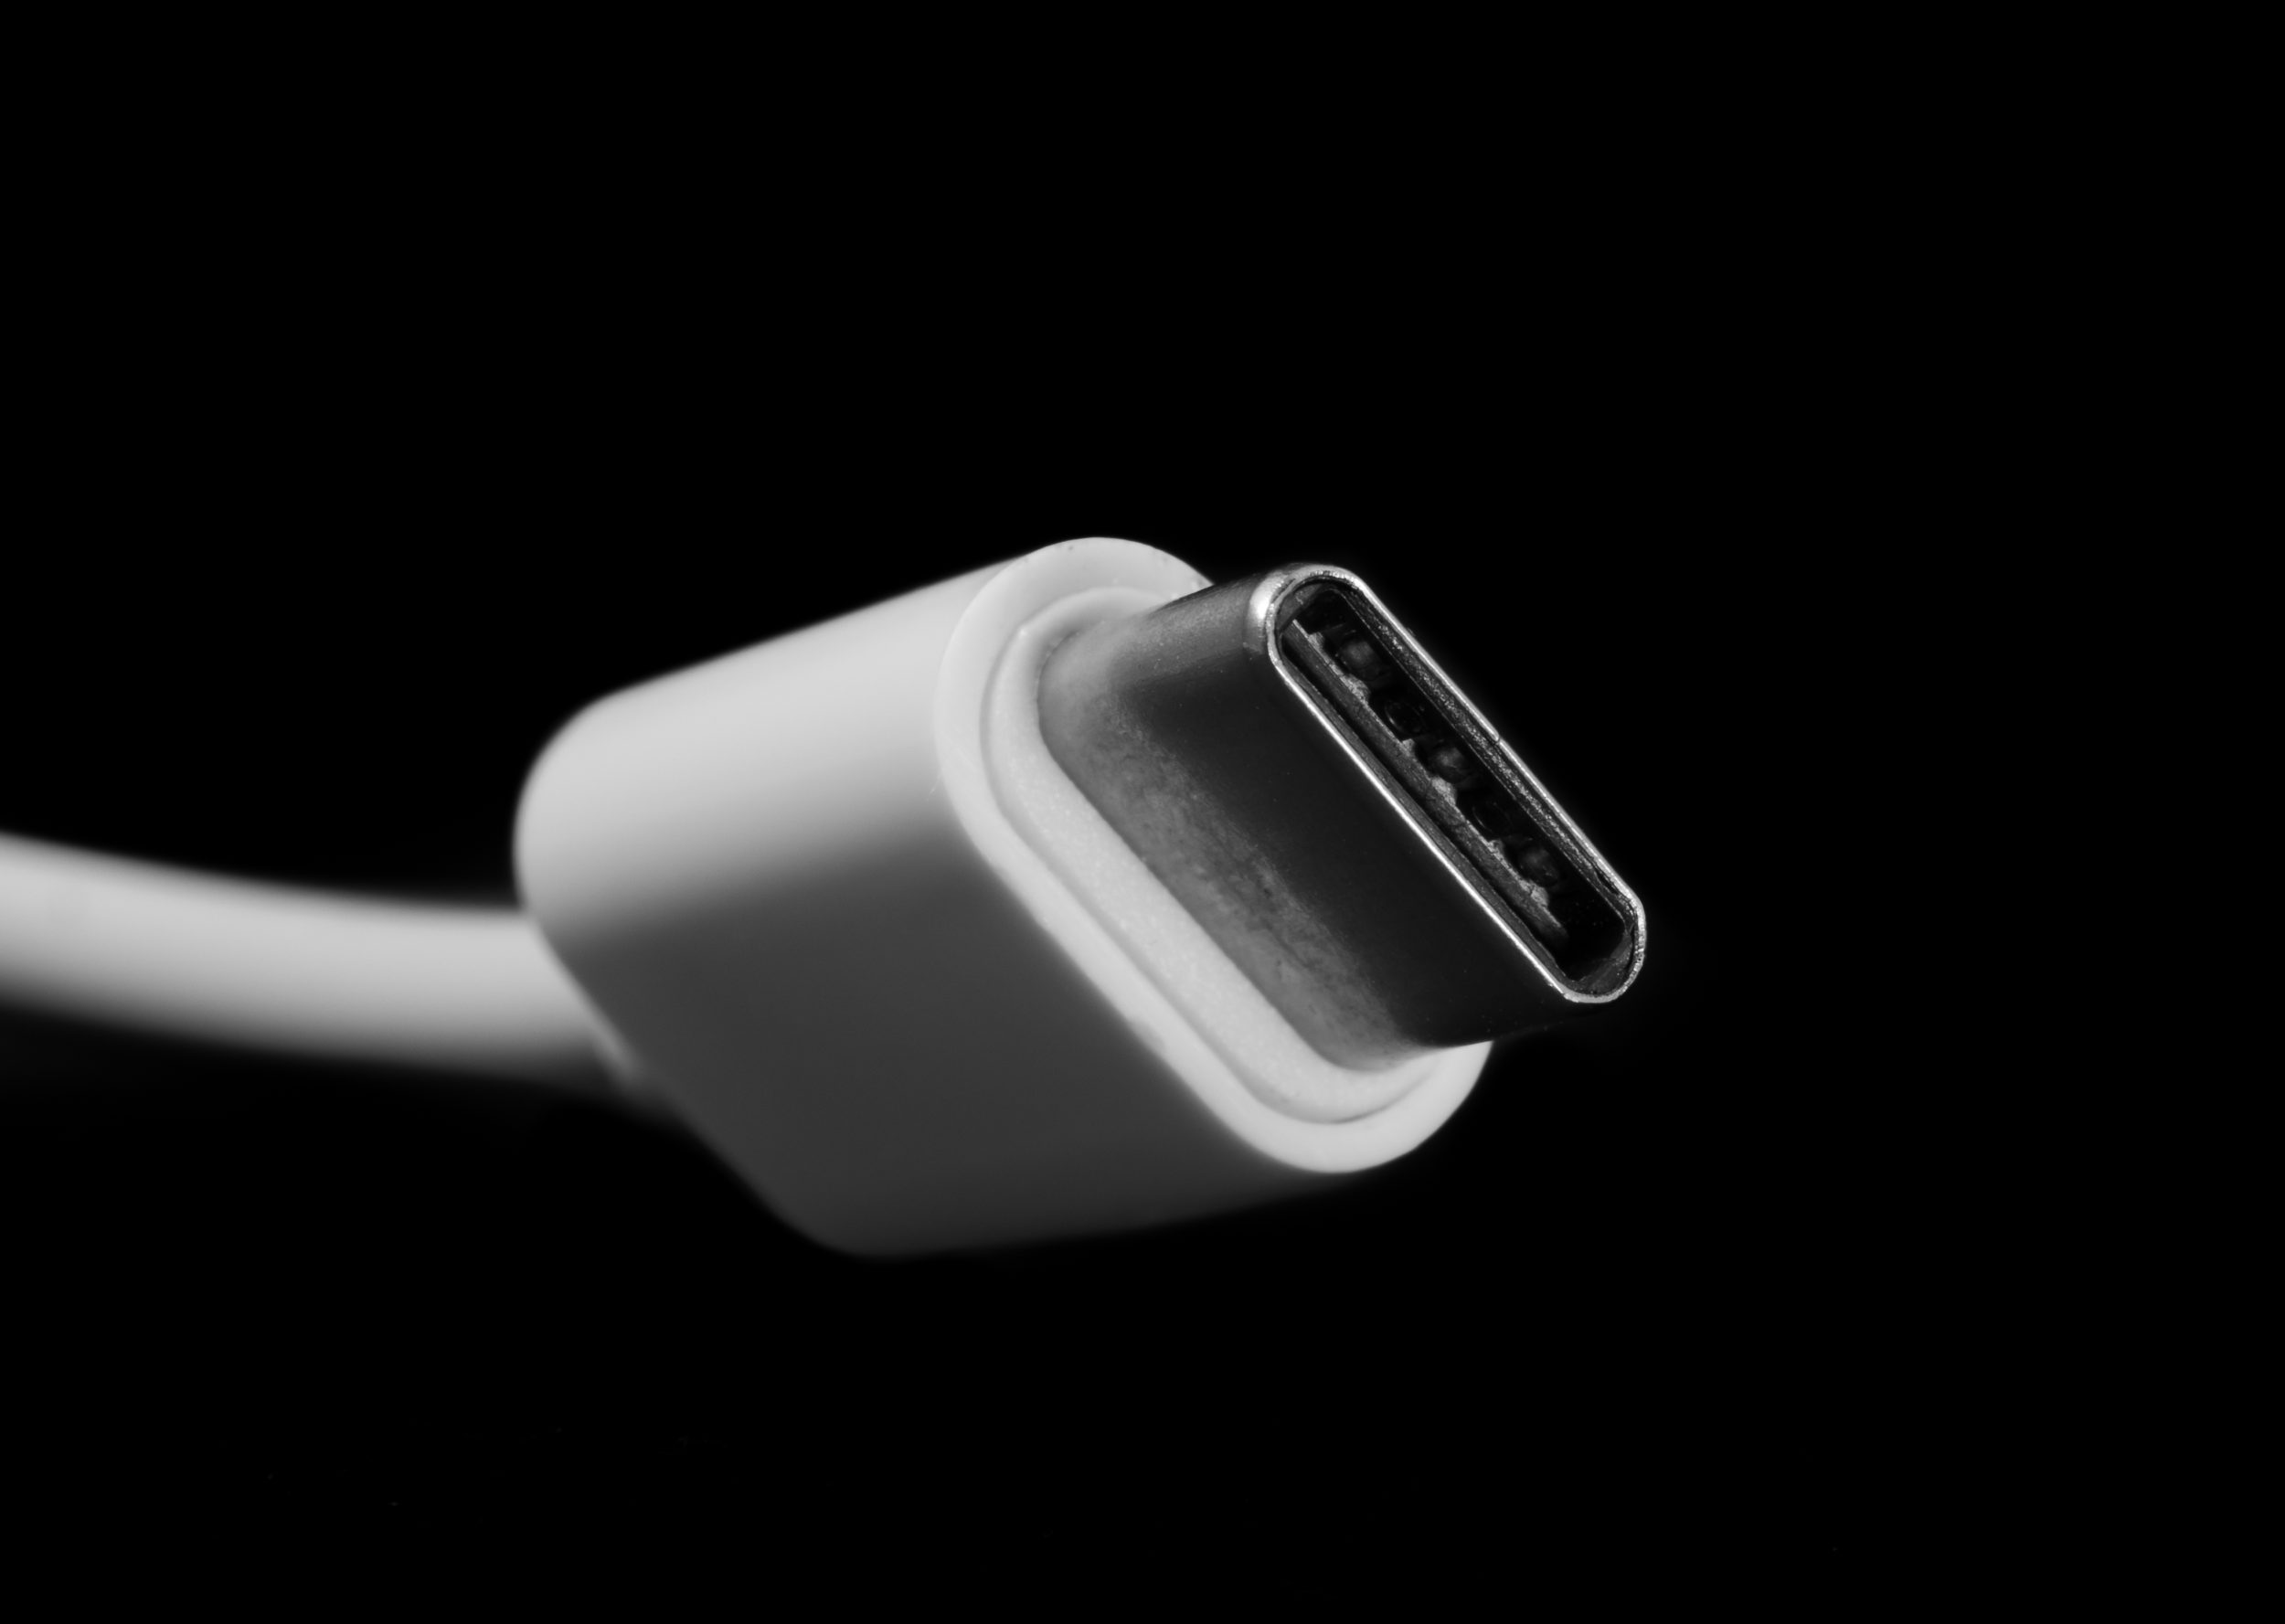 Micro USB type C or USB-C plug and white cable close-up for medical computer